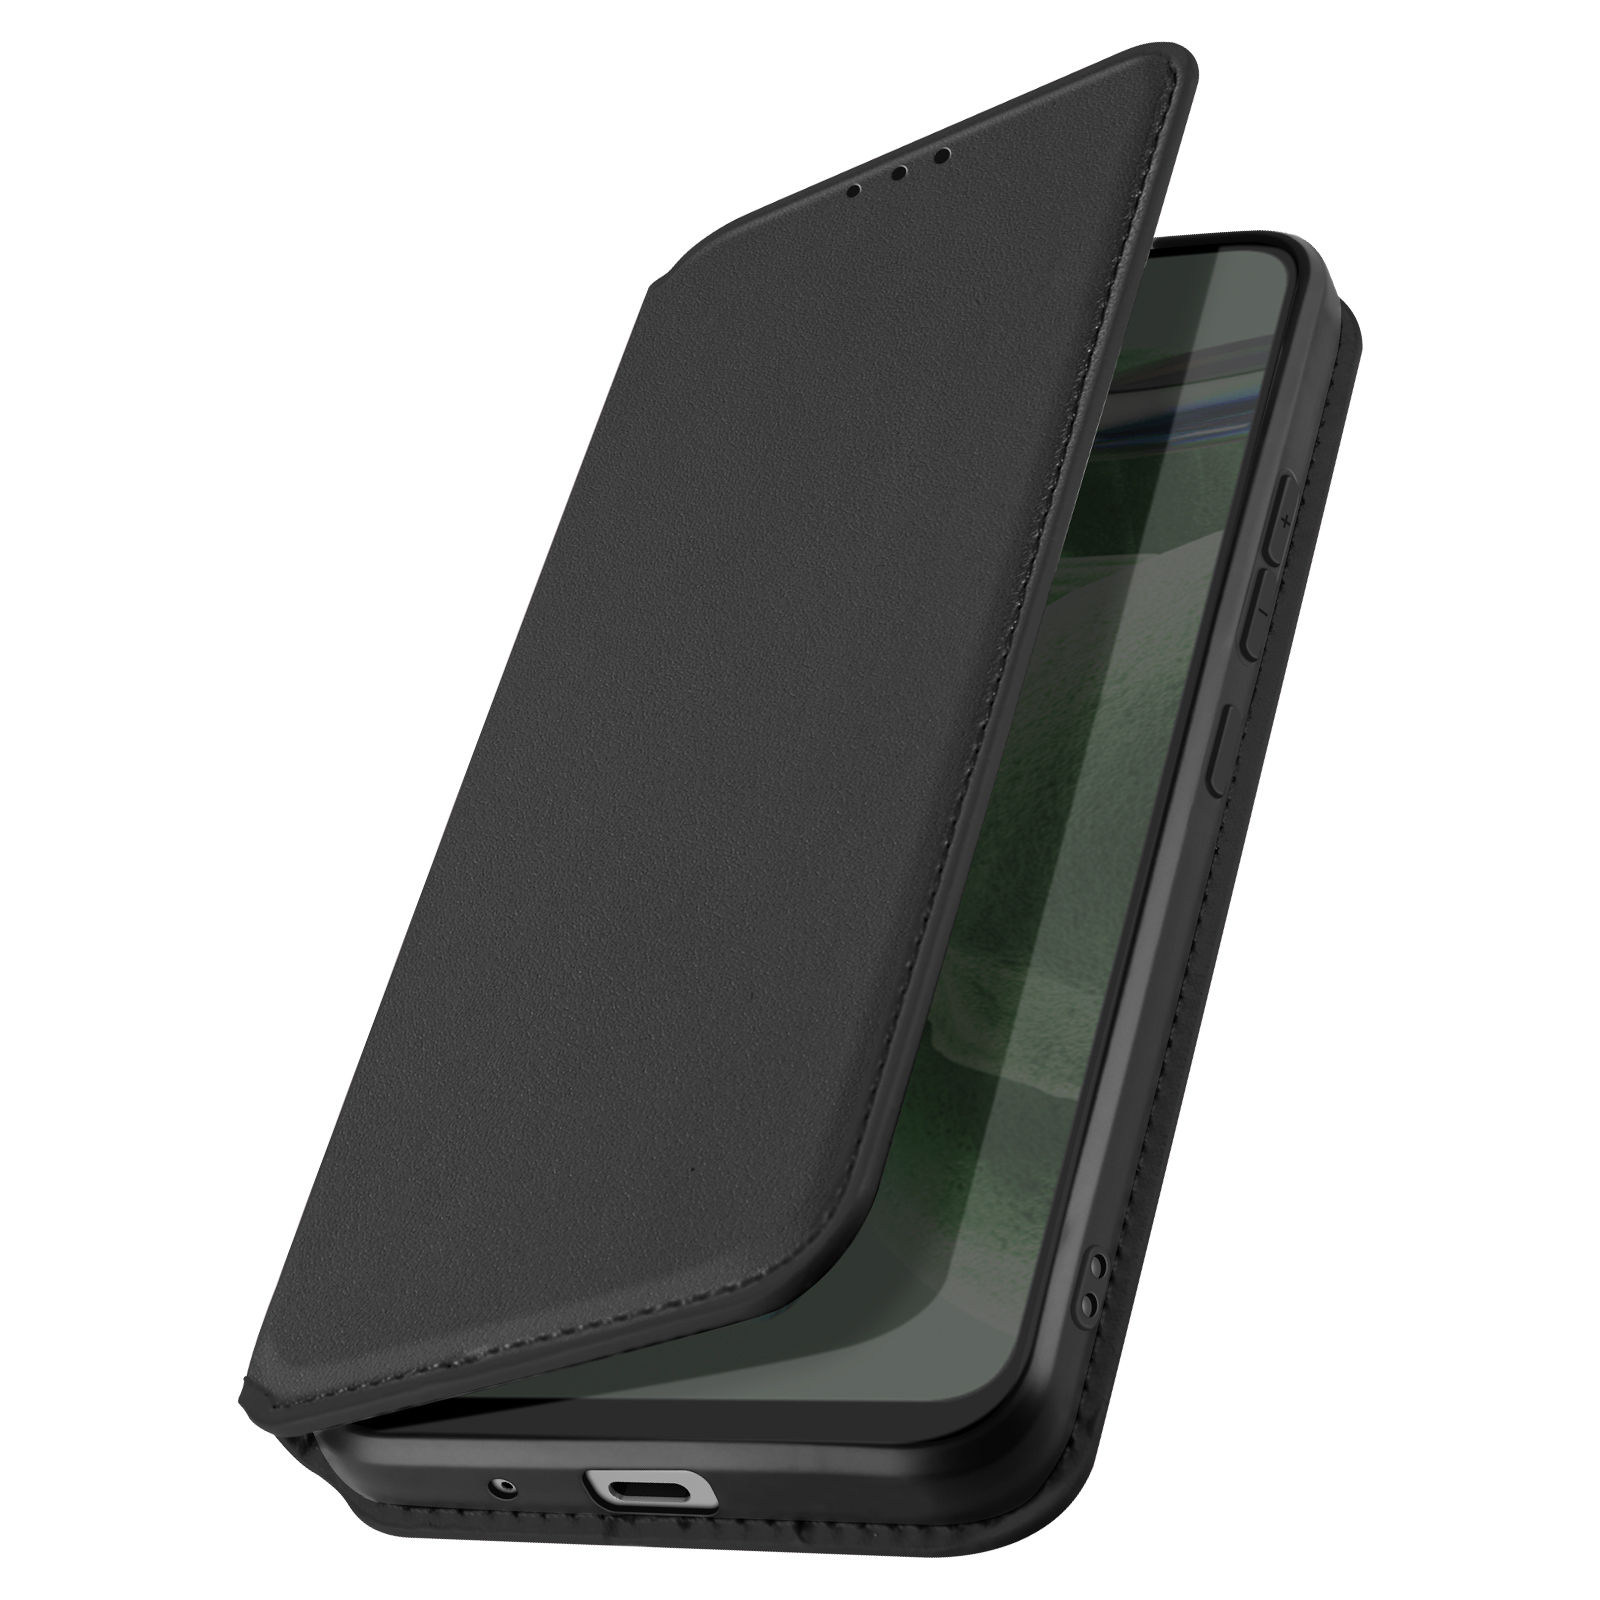 mit Bookcover, Huawei Edition, AVIZAR Y6p, Schwarz Series, Classic Huawei, Magnetklappe Backcover